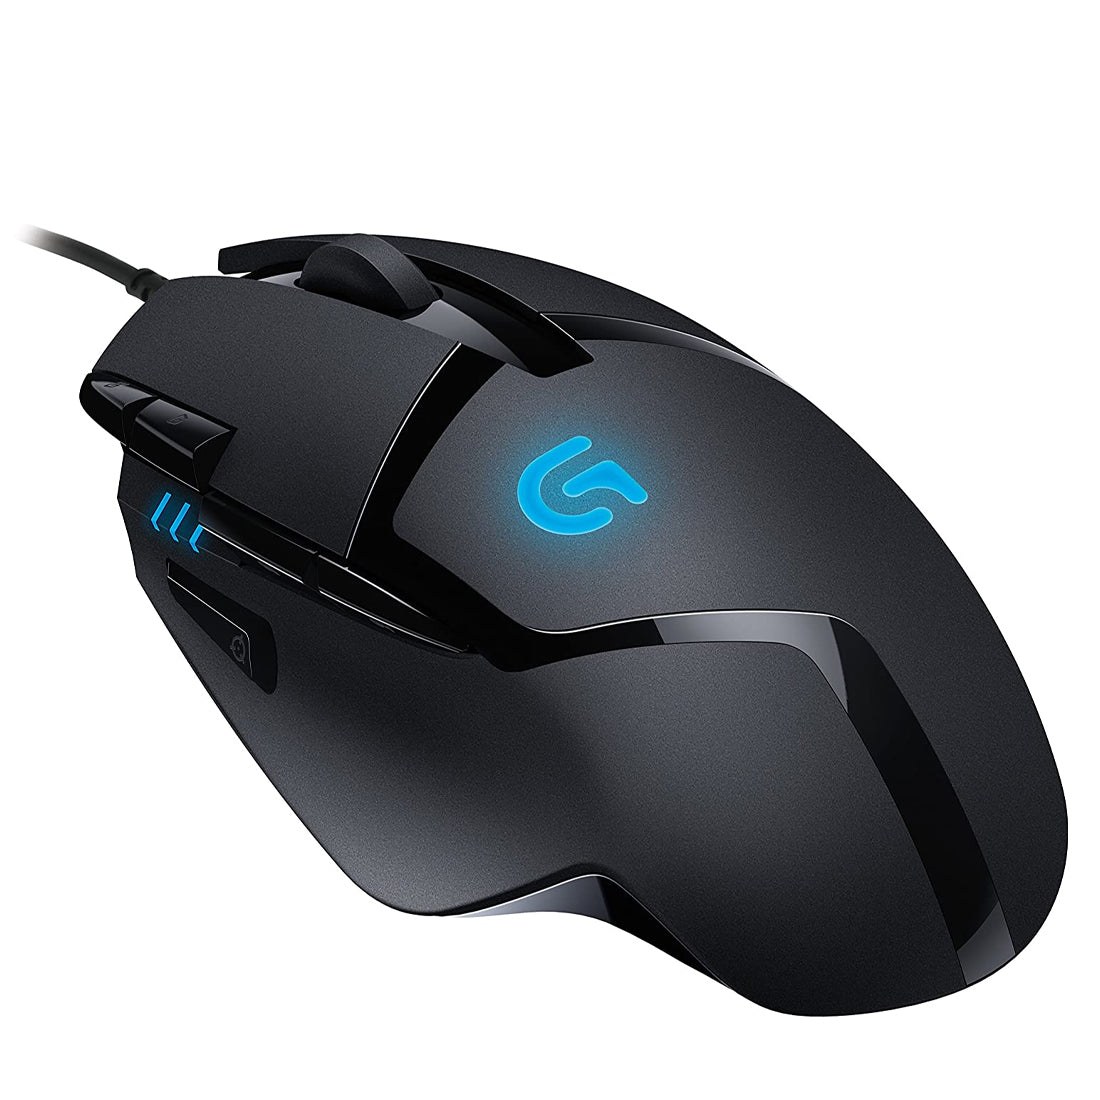 Logitech G402 Hyperion Fury Wired Fusion Engine Sensor Gaming Mouse with Adjustable DPI Up to 4000 and 8 Programmable Buttons